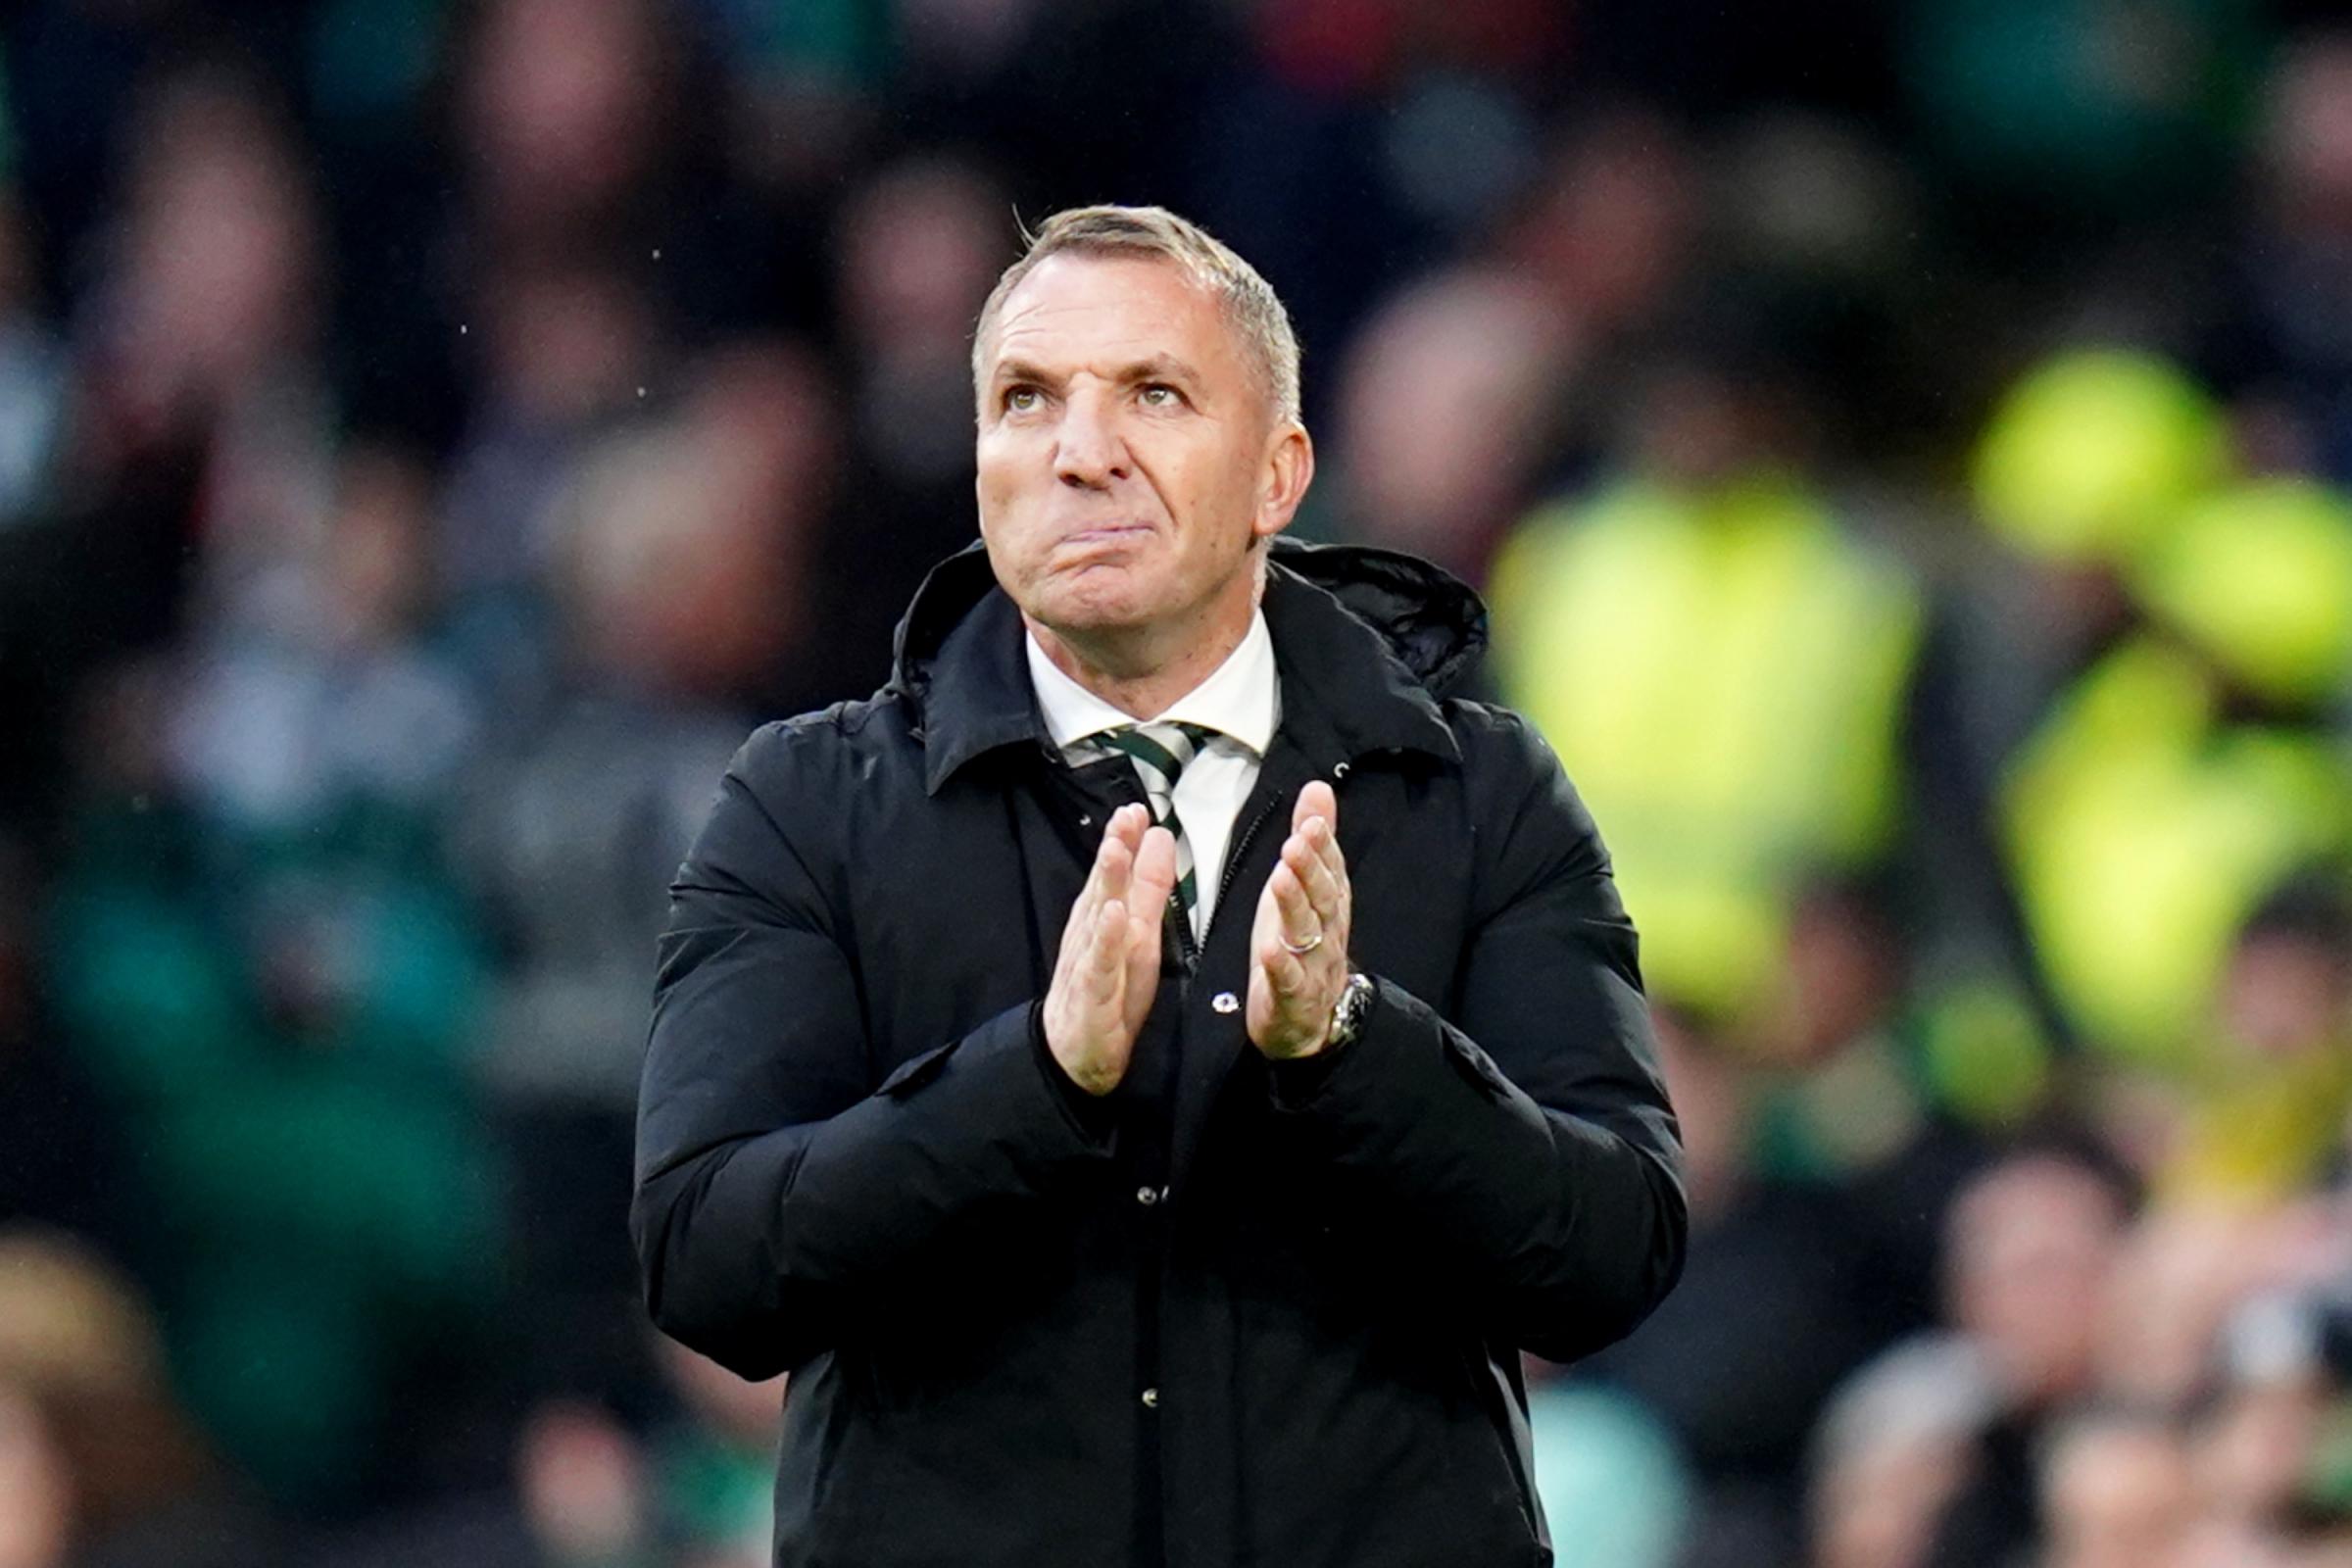 Celtic boss Rodgers 'disappointed' with officials for Kilmarnock goal